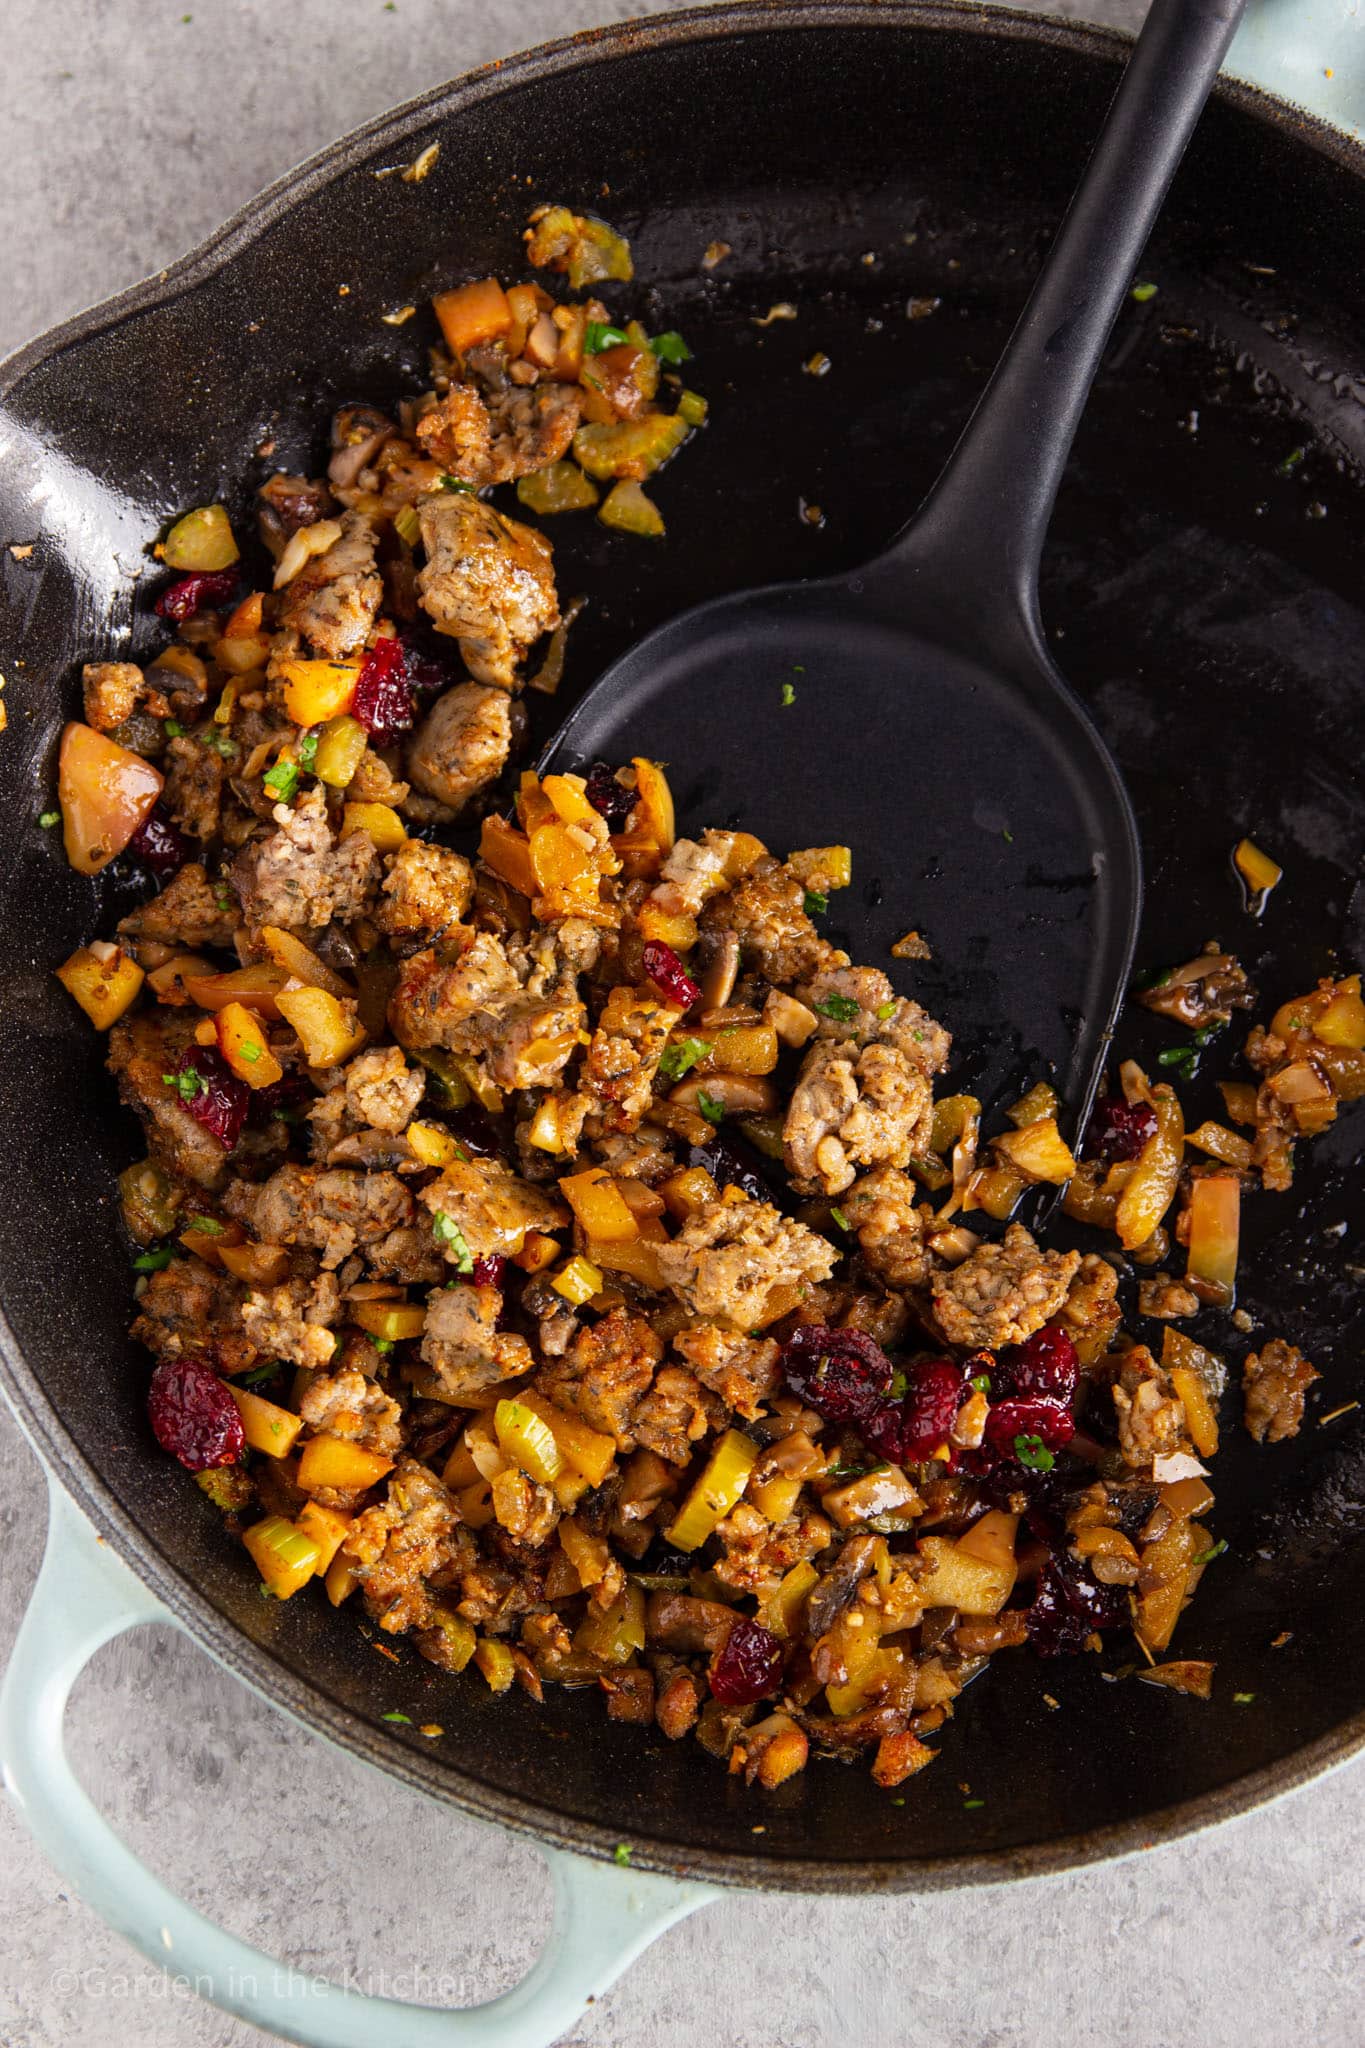 Sausage and apple stuffing in cast iron skillet.